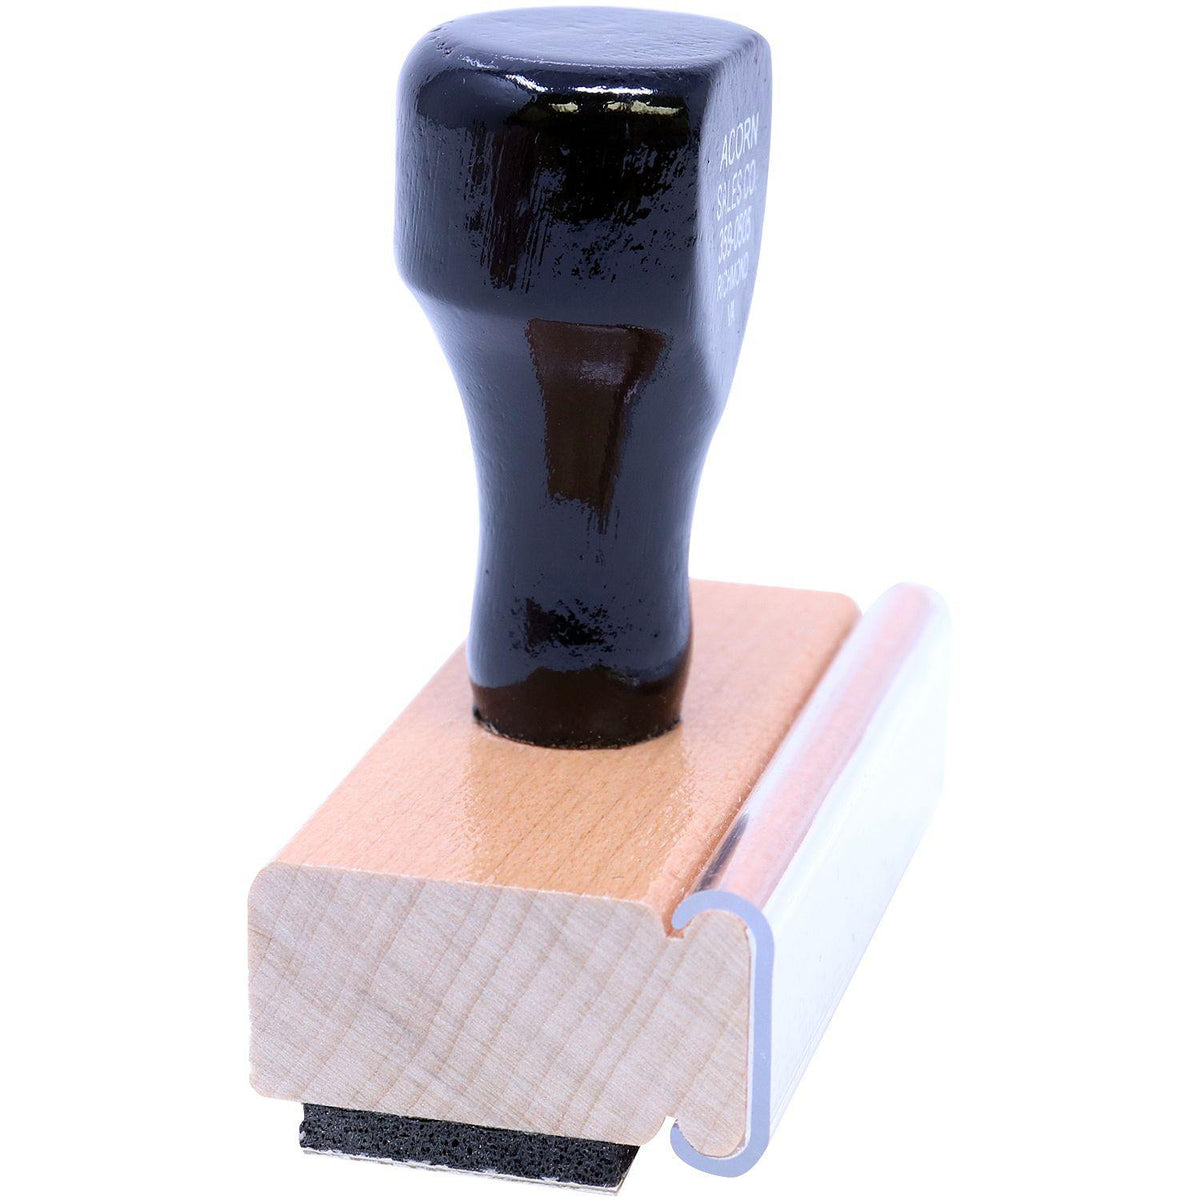 Side View of Large Medigap Rubber Stamp at an Angle